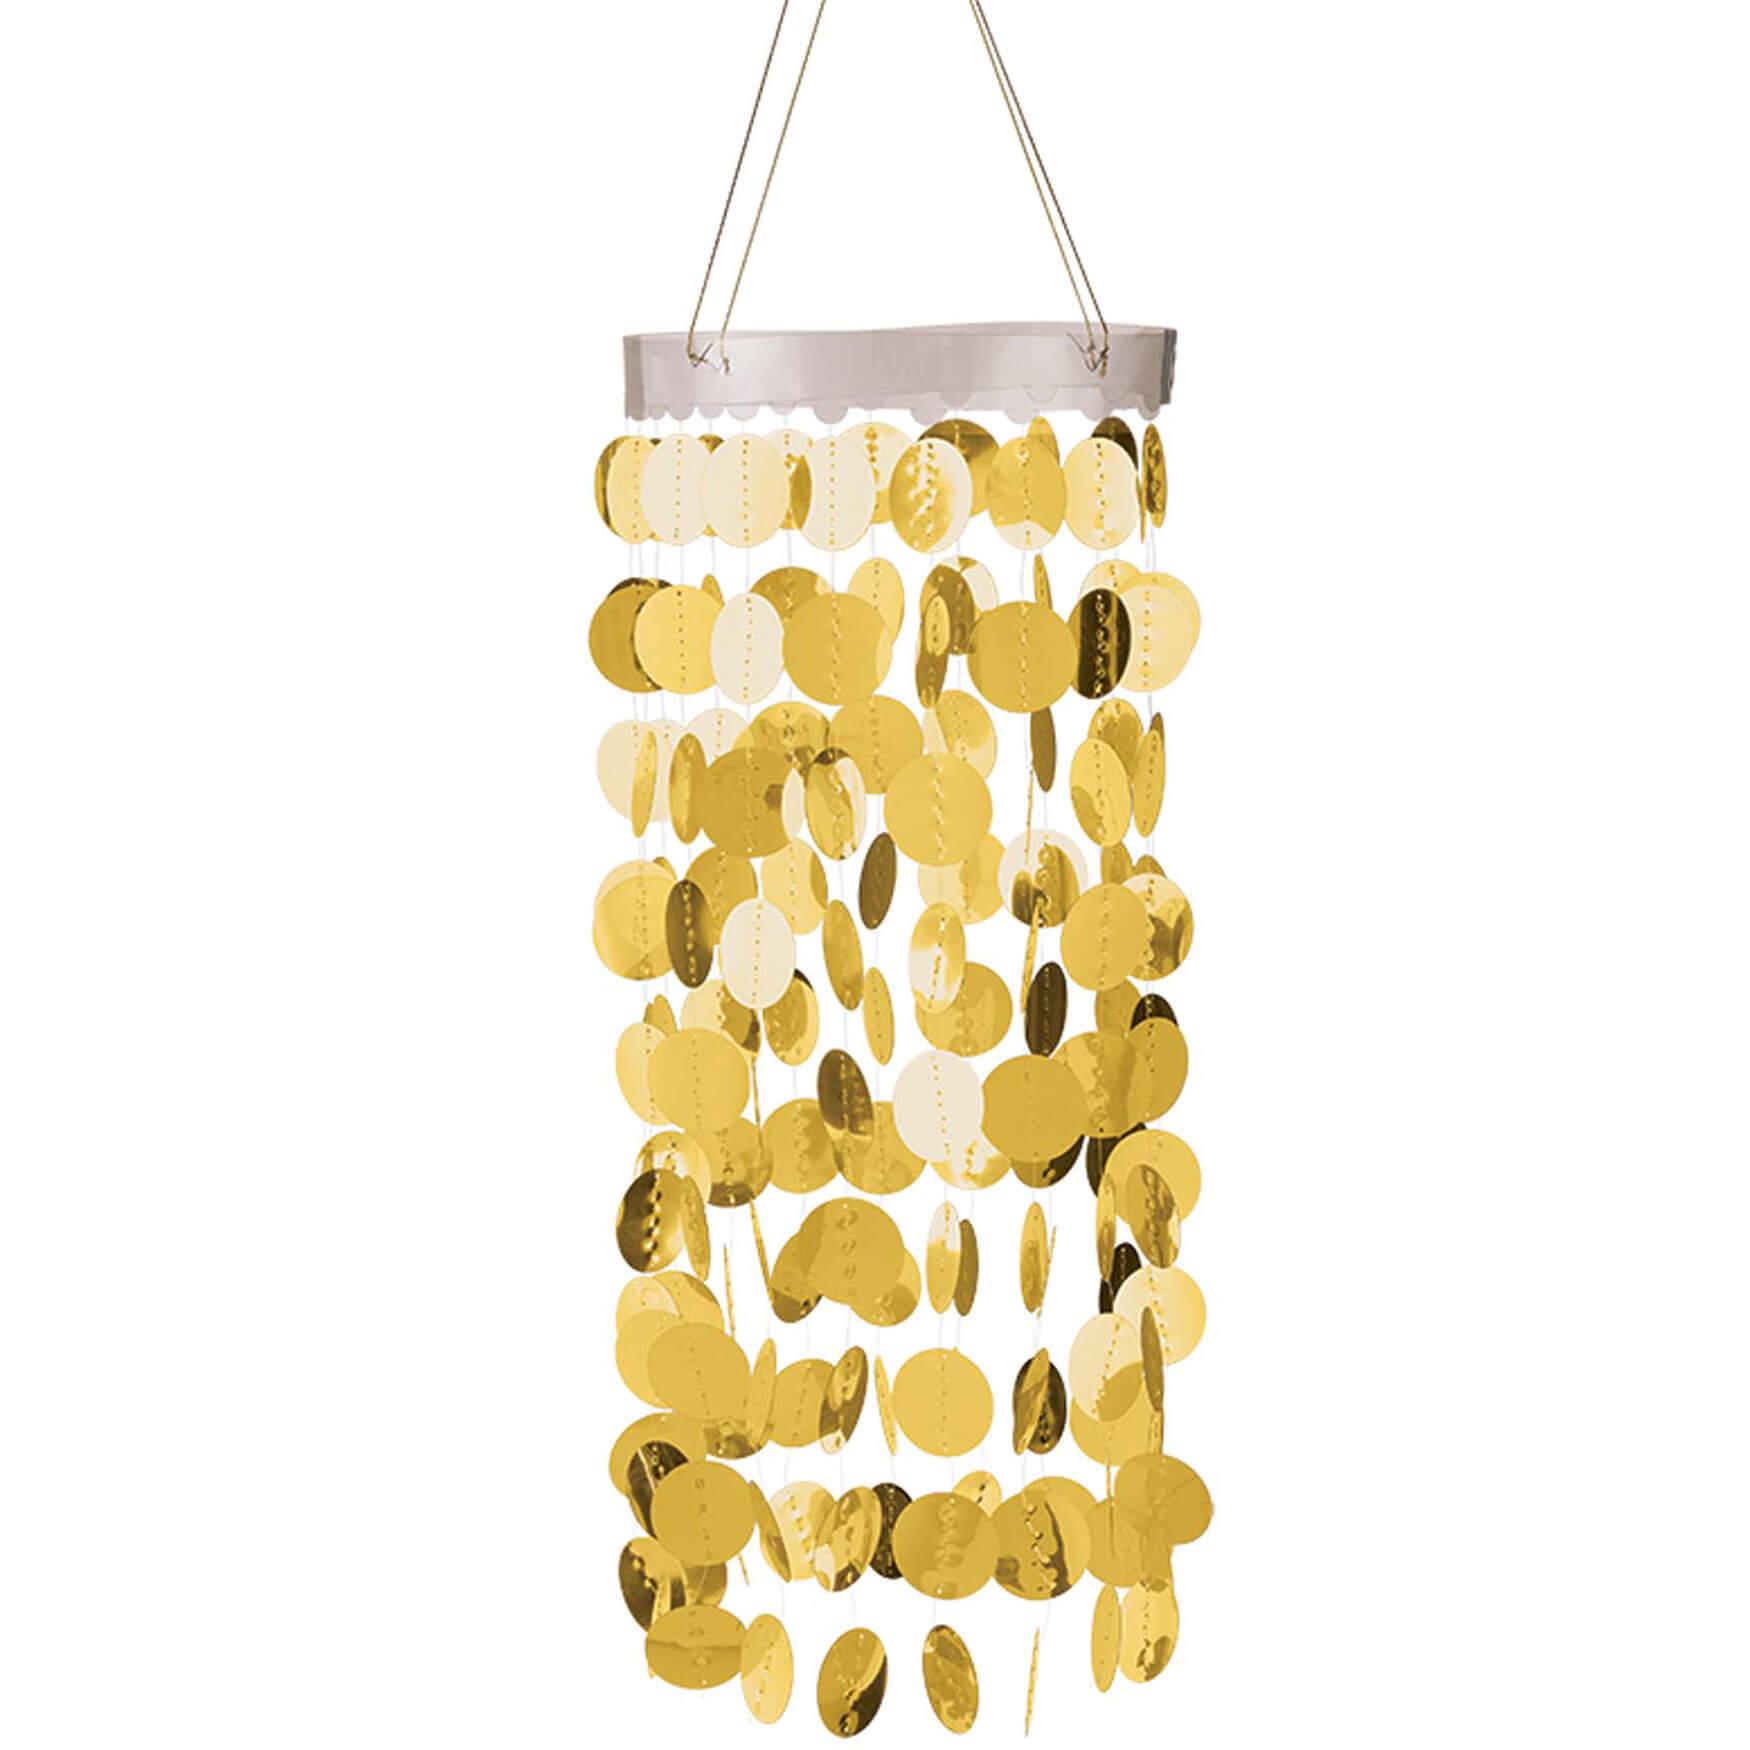 Gold Hanging Circle Chandelier Decorations - Party Centre